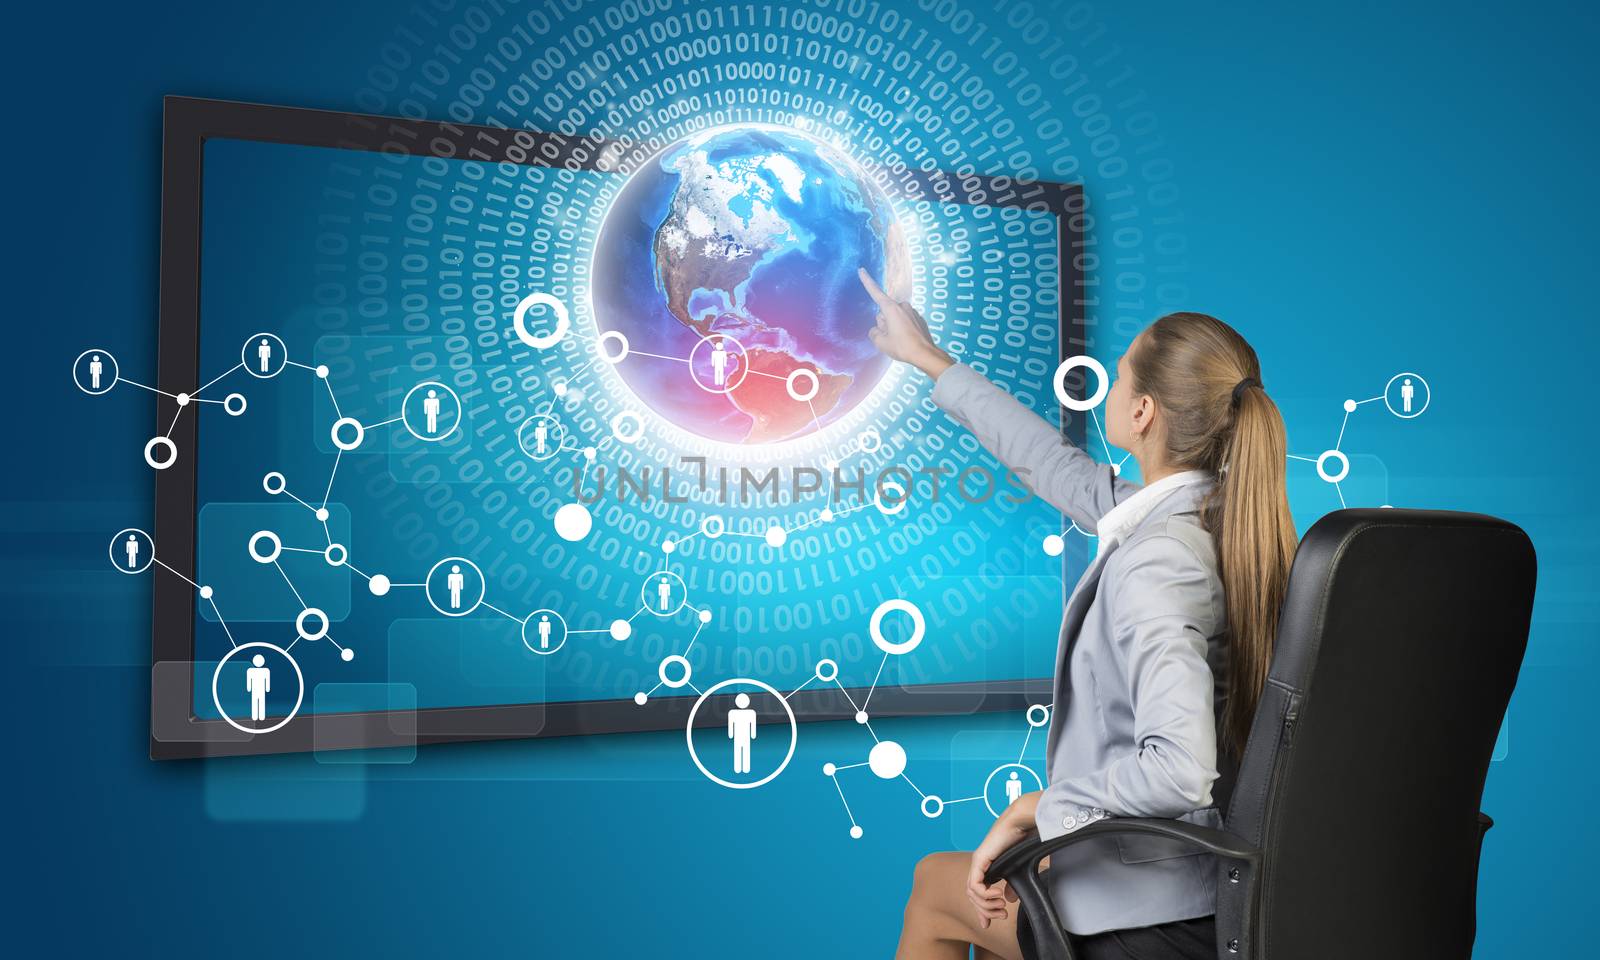 Businesswoman pressing touch screen button on virtual interface with Globe and network with people icons, on blue background. Element of this image furnished by NASA